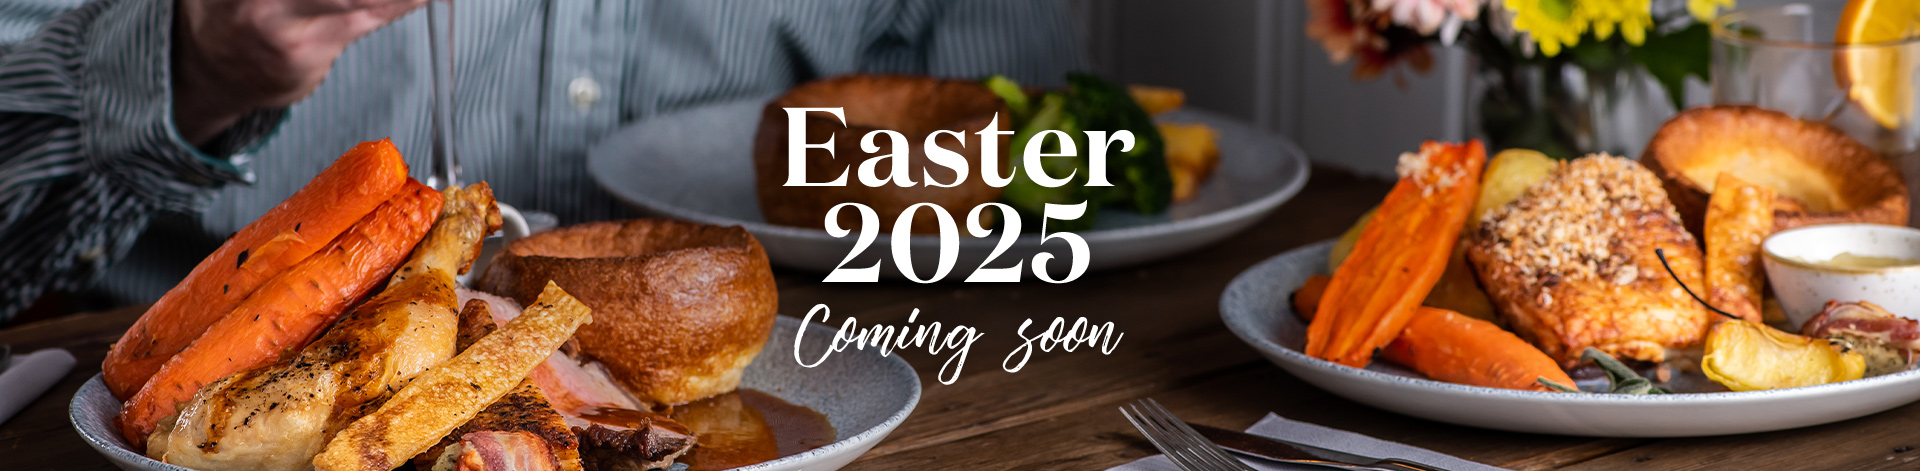 Easter at The Green Man in Longfield